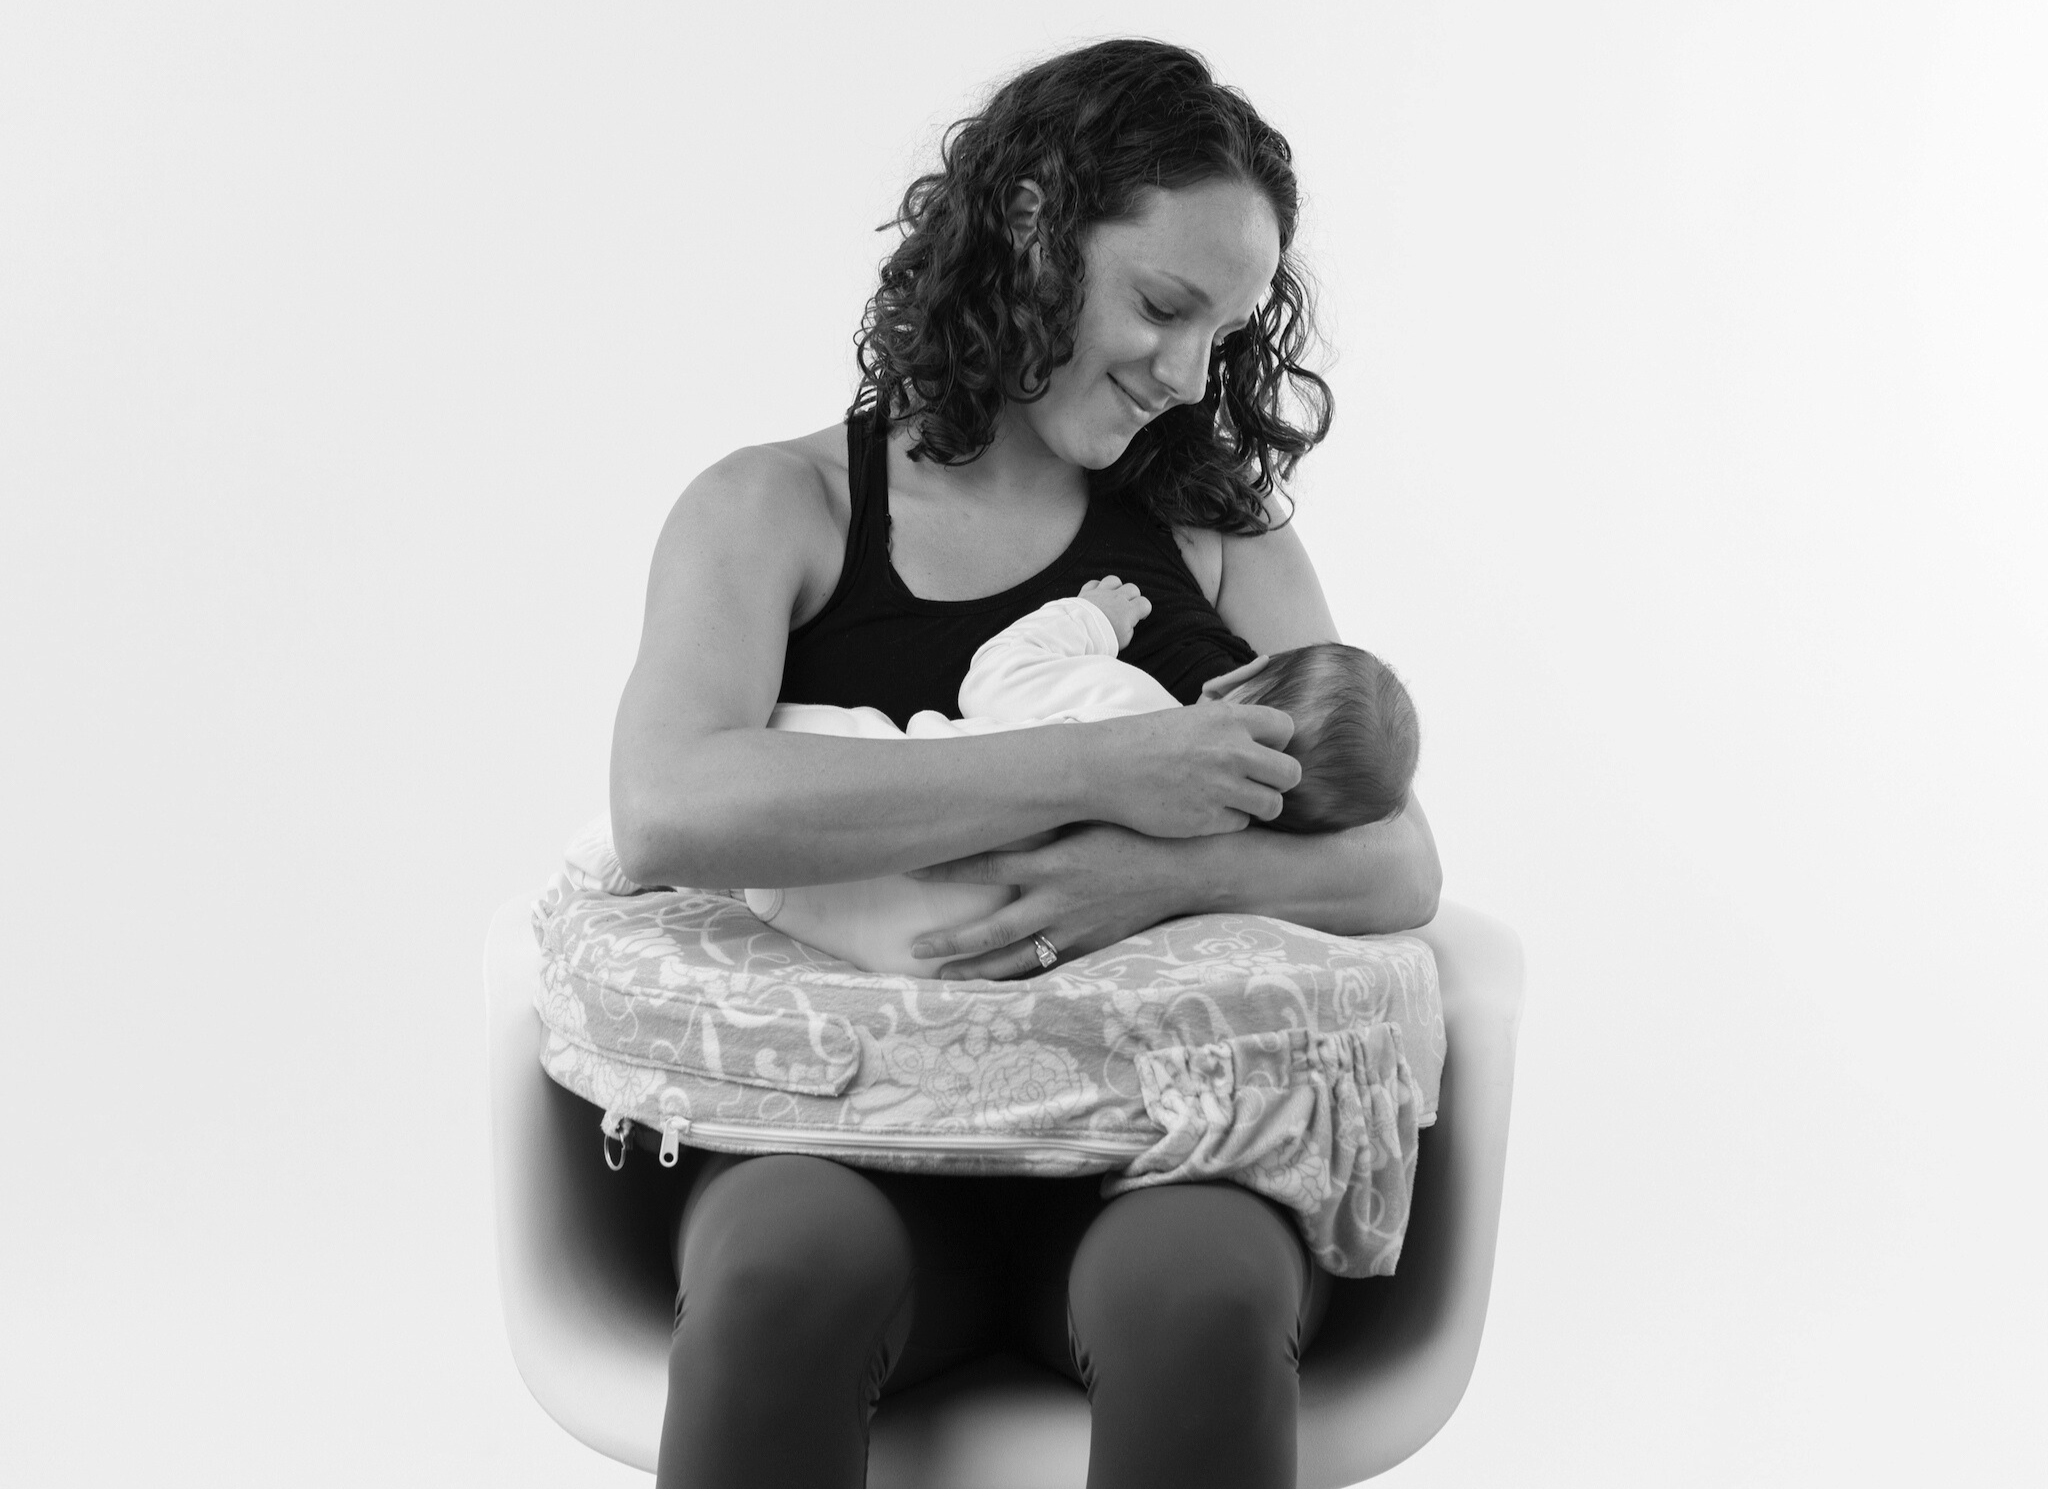 woman sitting in chair with pillow holding baby